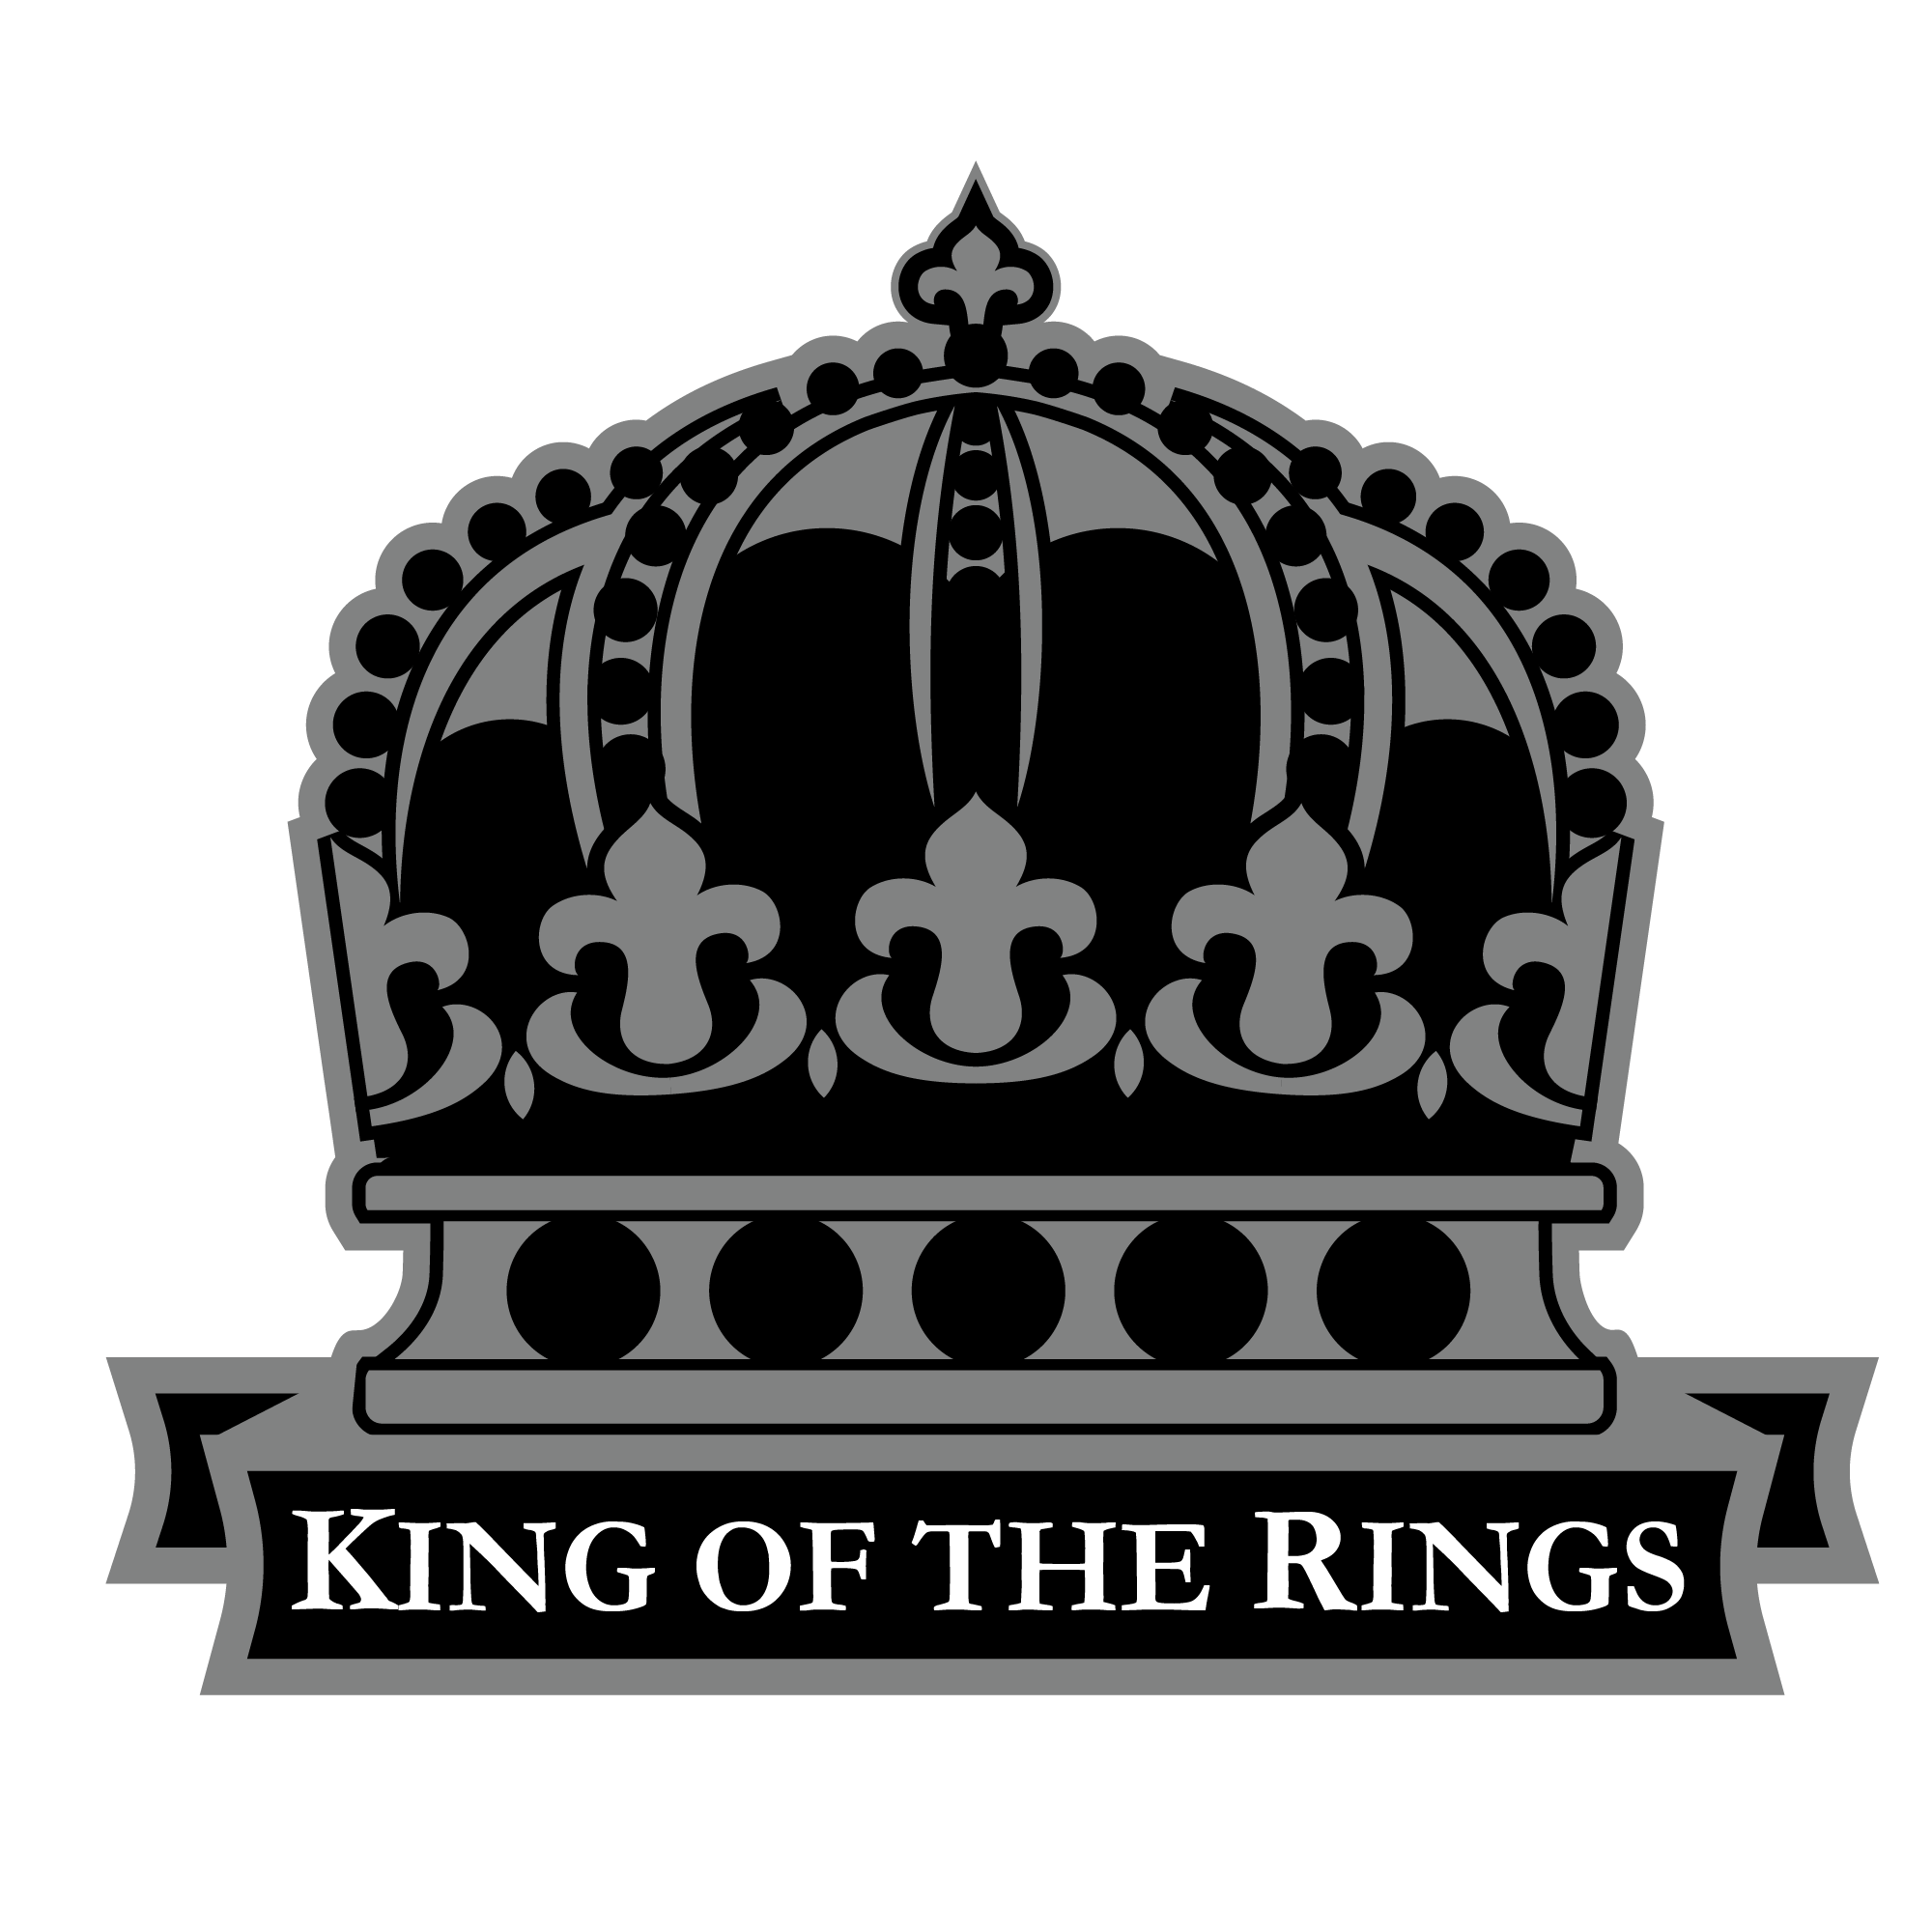 CHICAGO KING OF THE RINGS